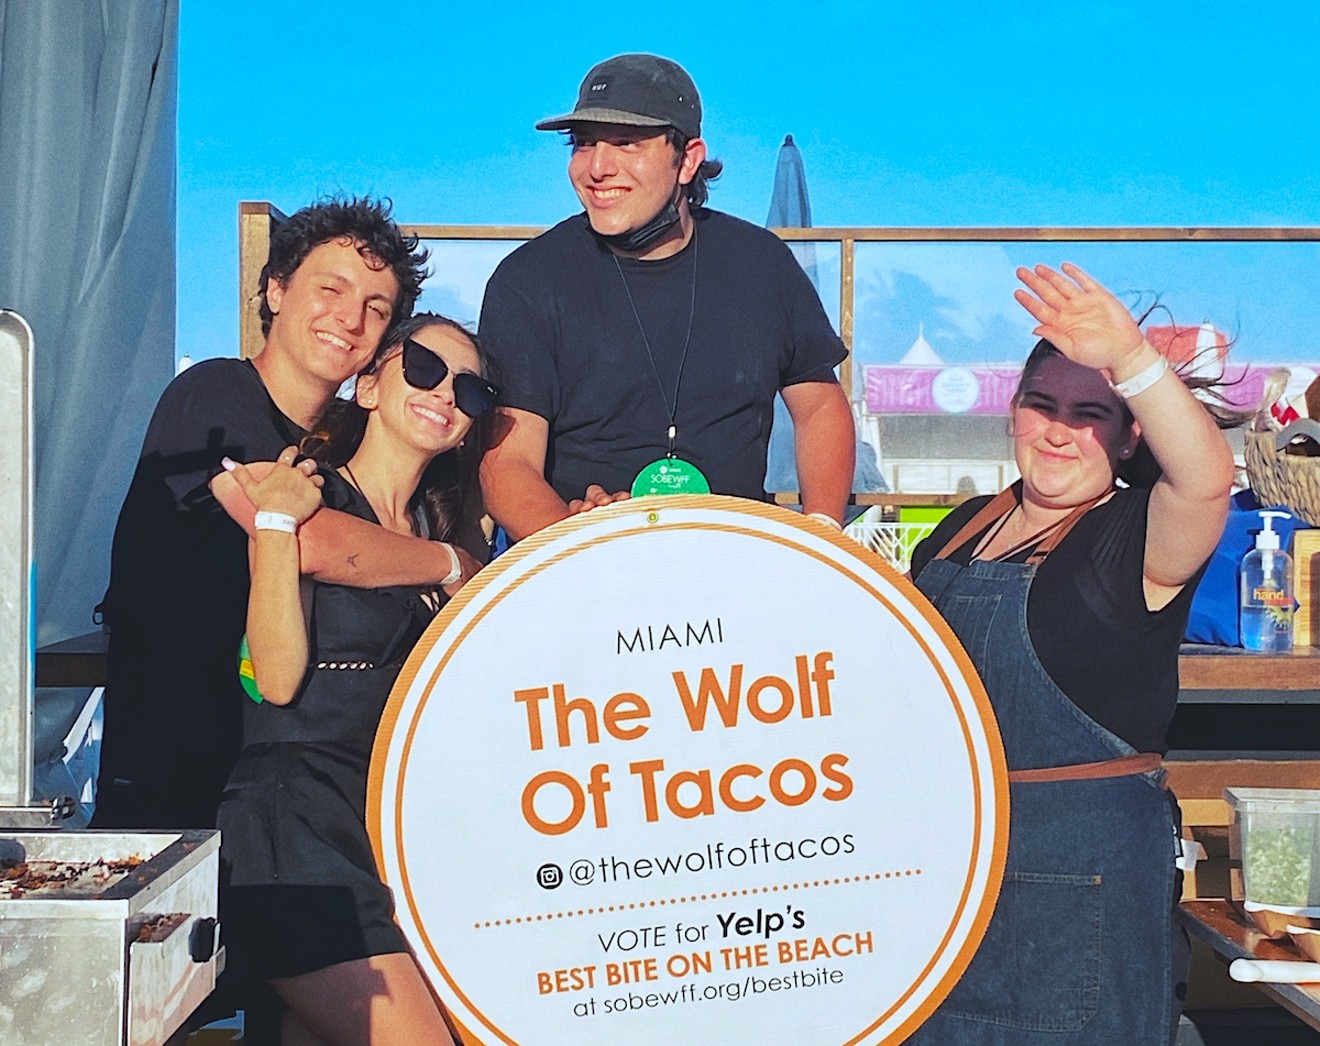 The Wolf of Tacos team (from left) Pablo Reyes, Stephanie Castro, Eduardo Lara, and Janise Guyot-Cabada popped up during the 2021 South Beach Wine & Food Festival.